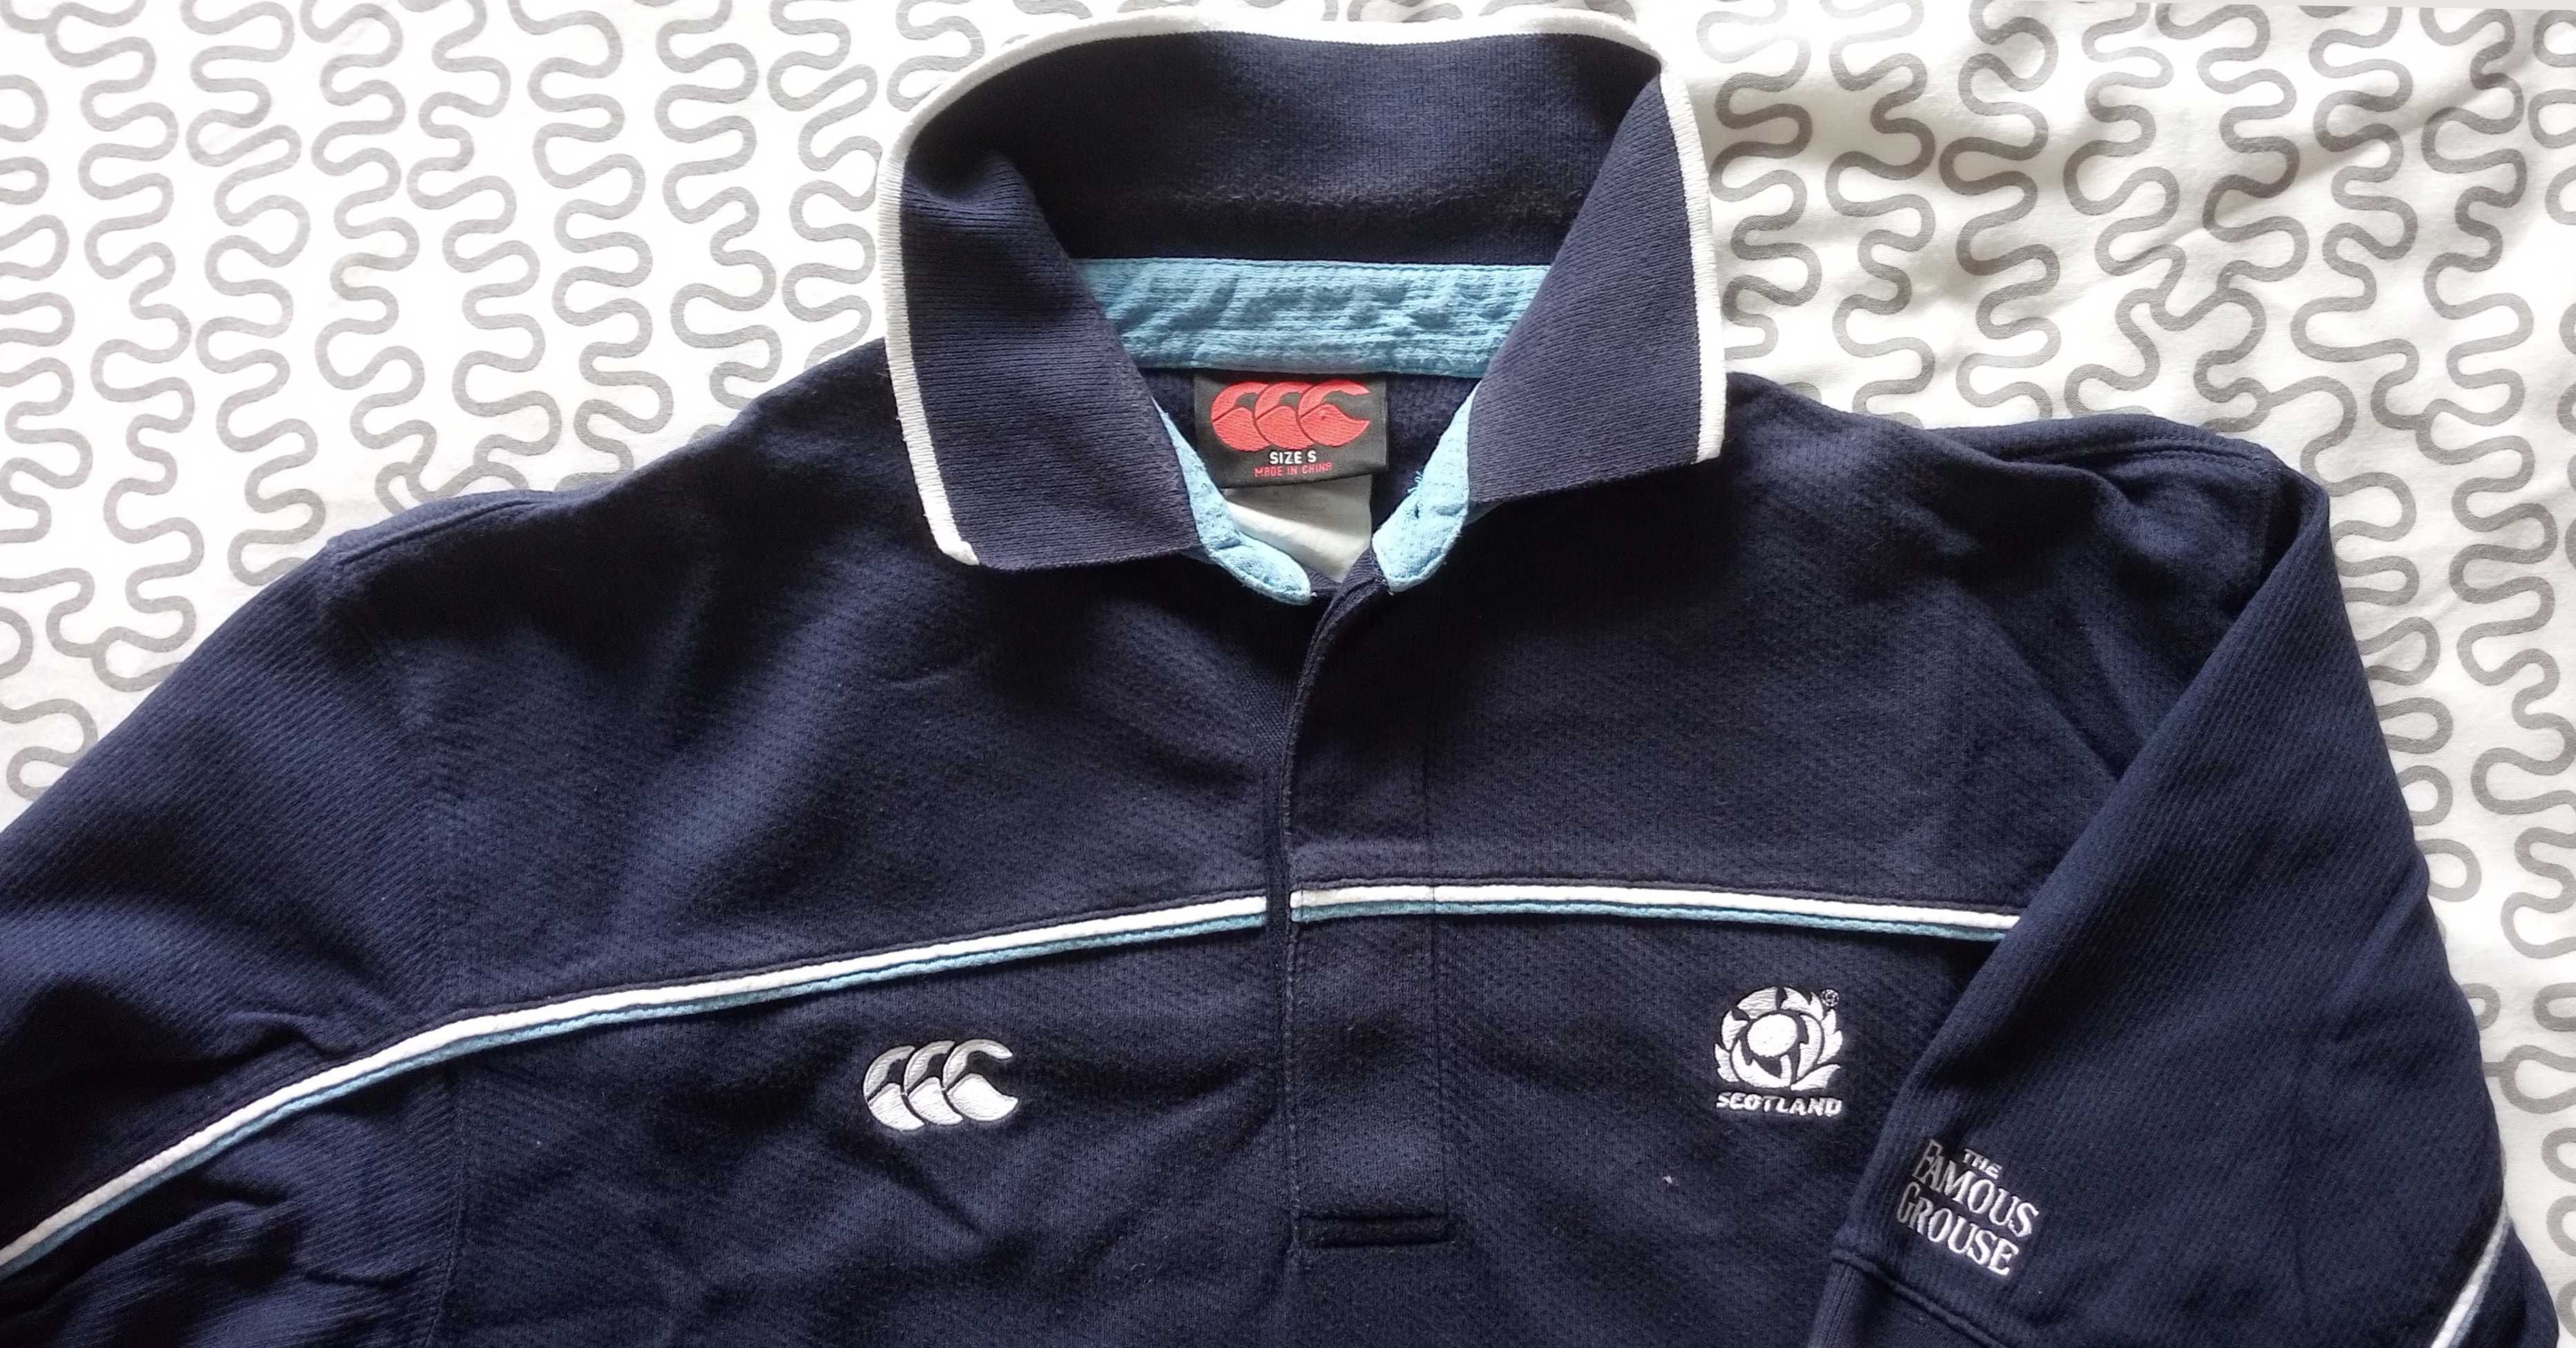 Canterbury Scotland Jersey rugby supporter